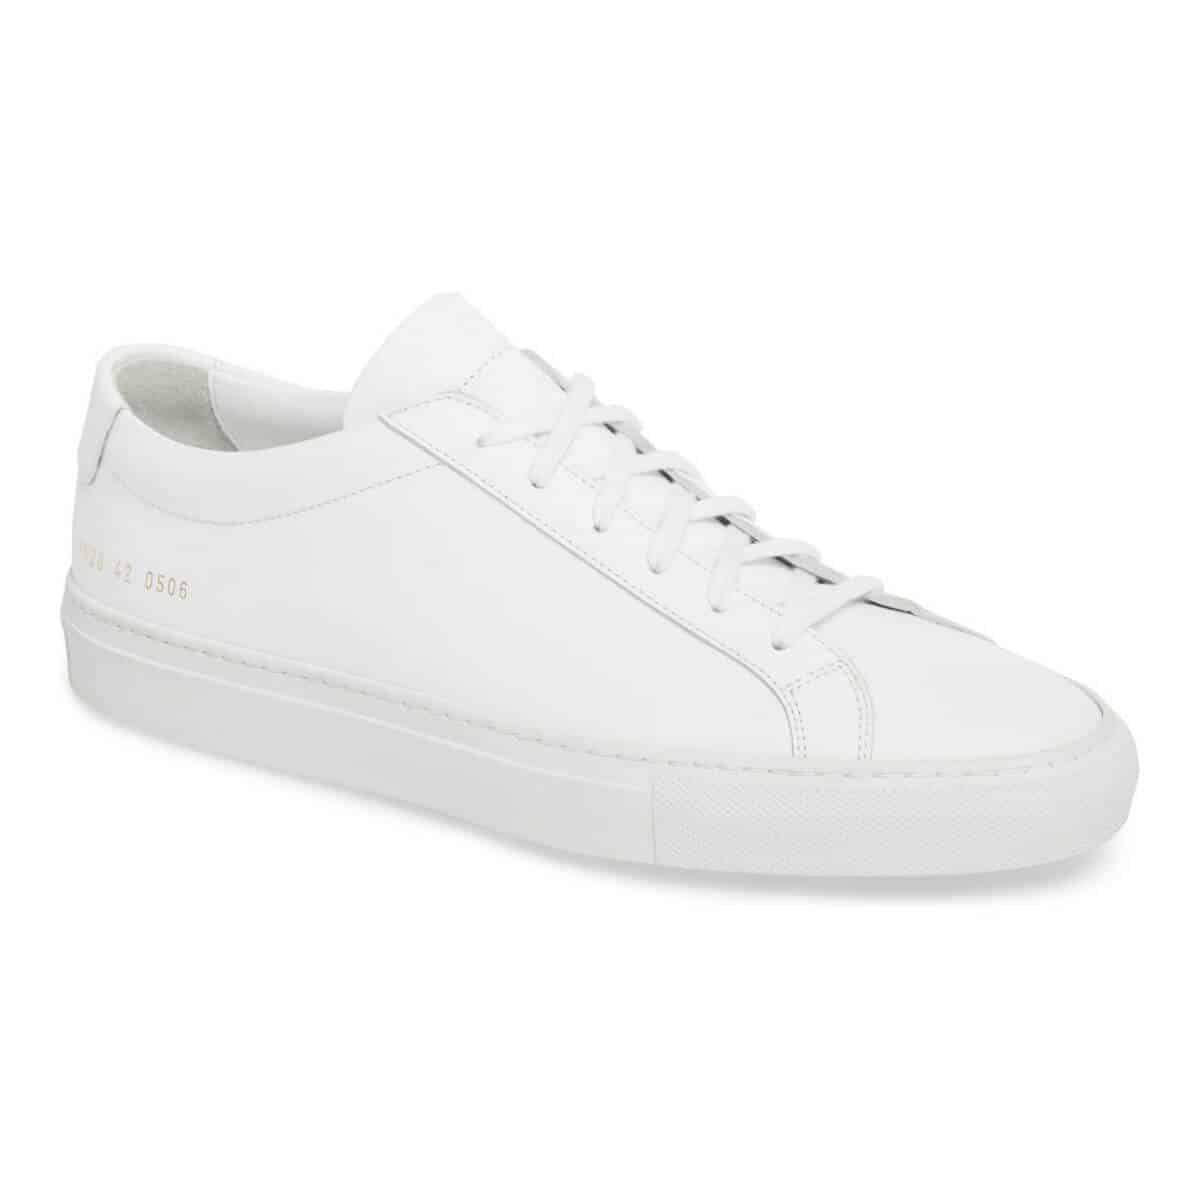 Common Projects Achilles white sneaker.